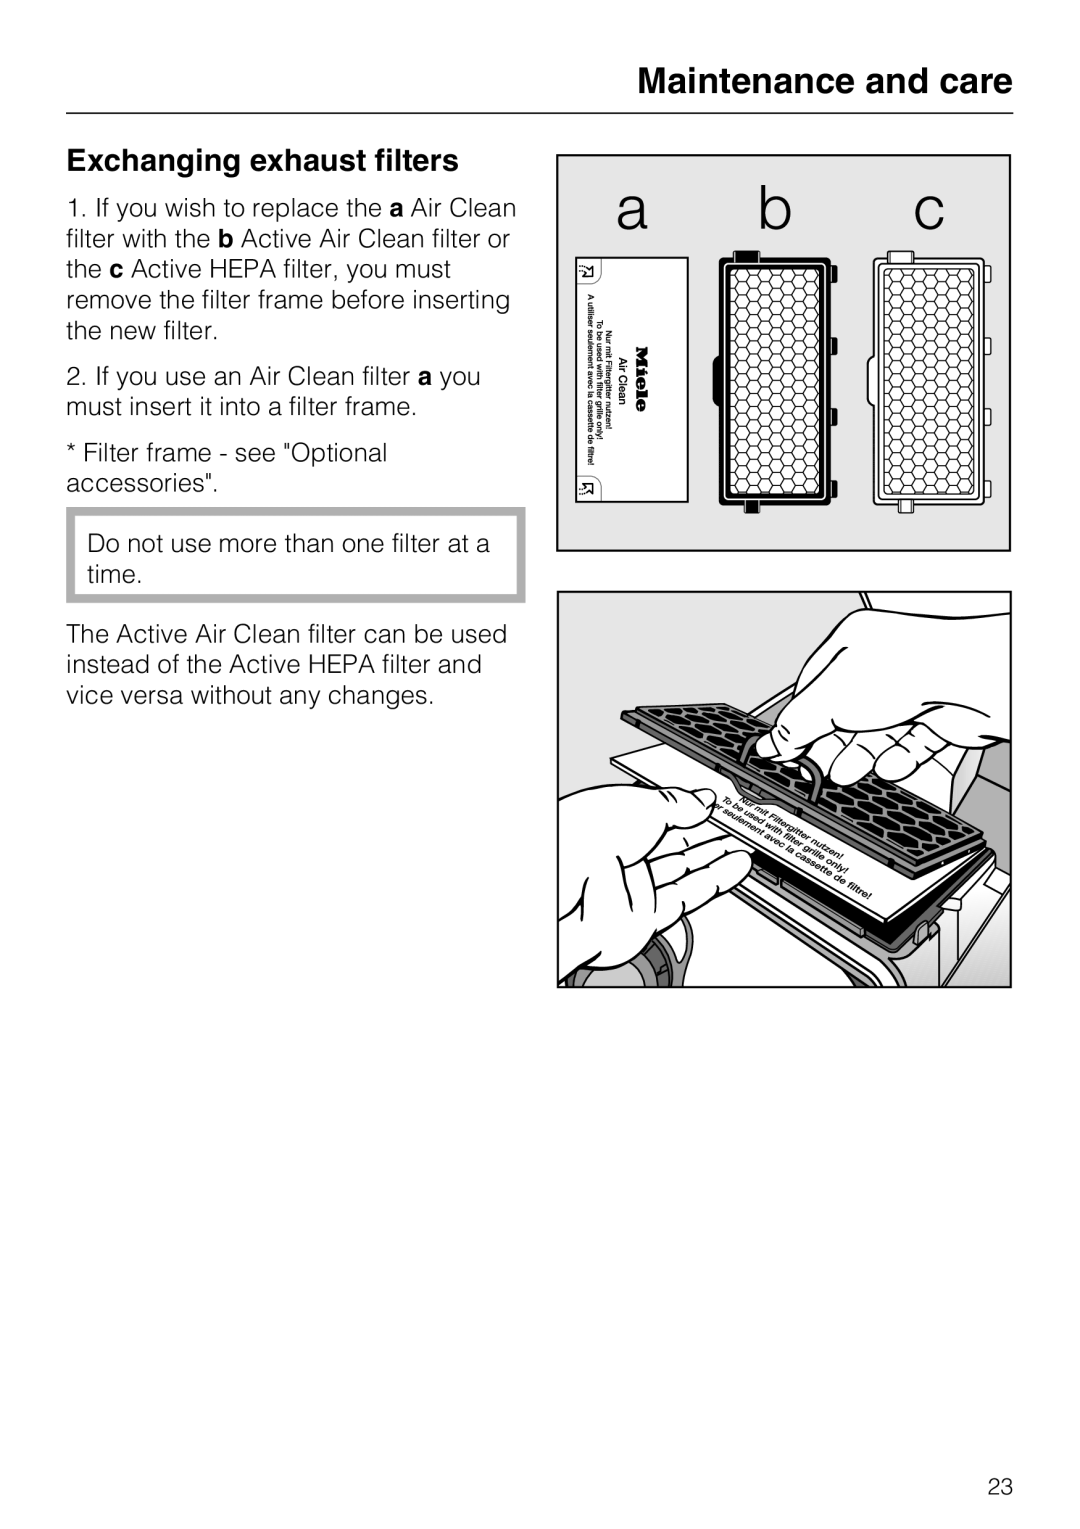 Miele S 6000 operating instructions Maintenance and care, Exchanging exhaust filters 